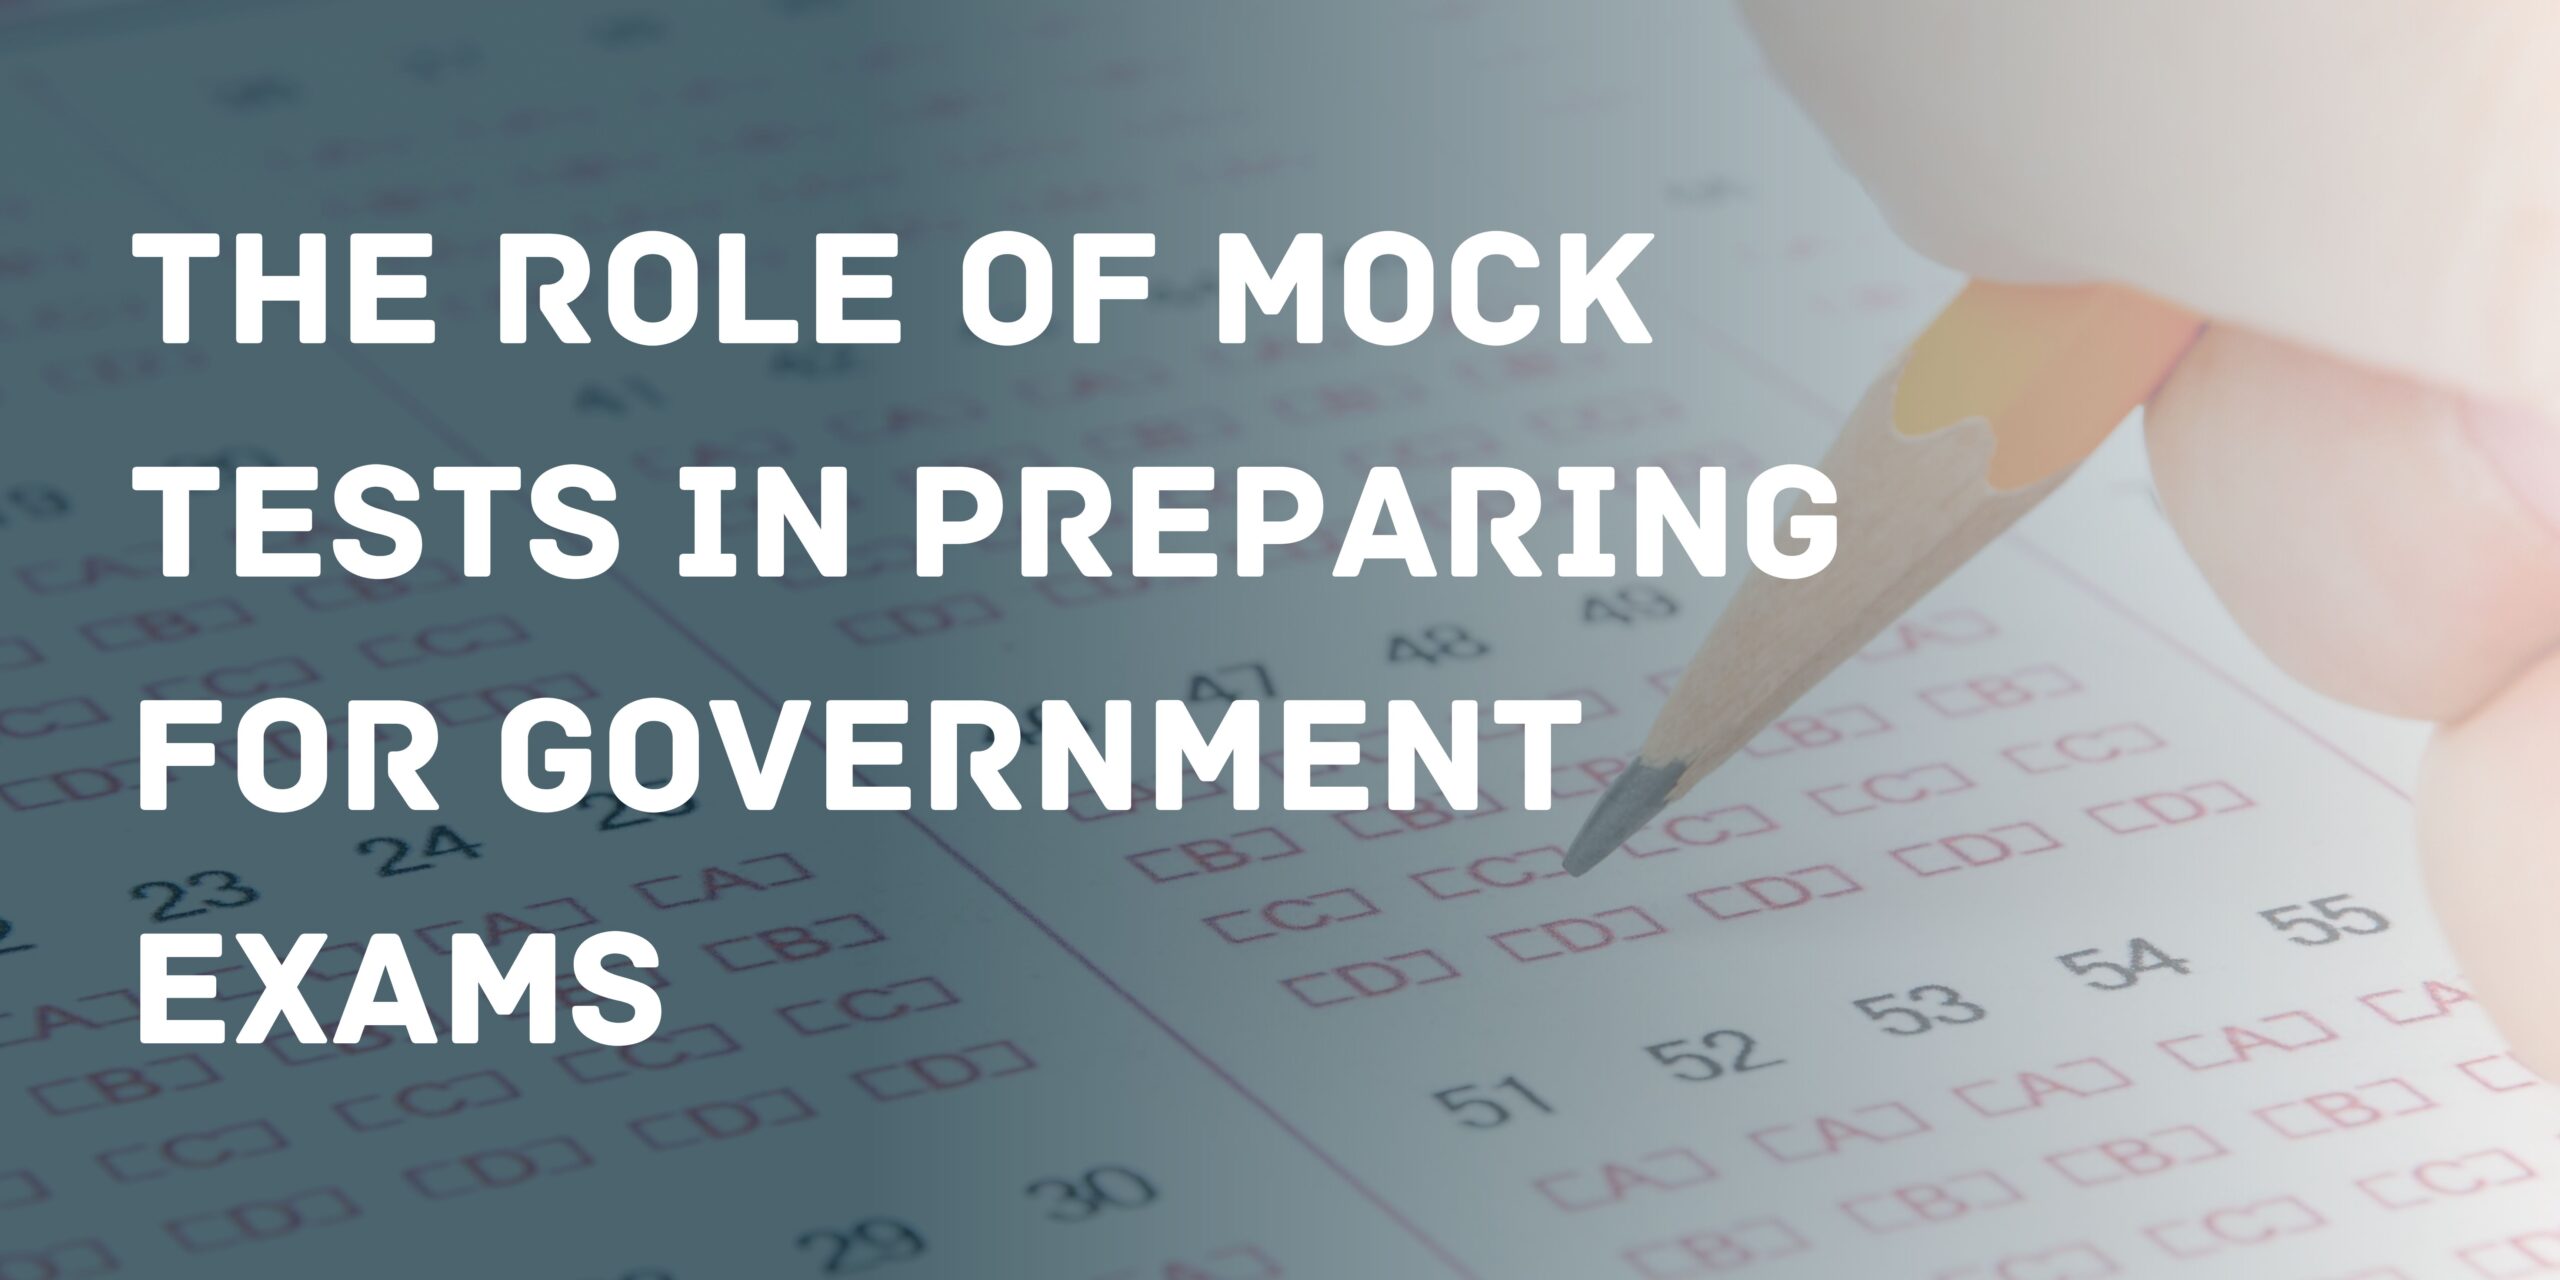 The role of mock tests in preparing for government exams